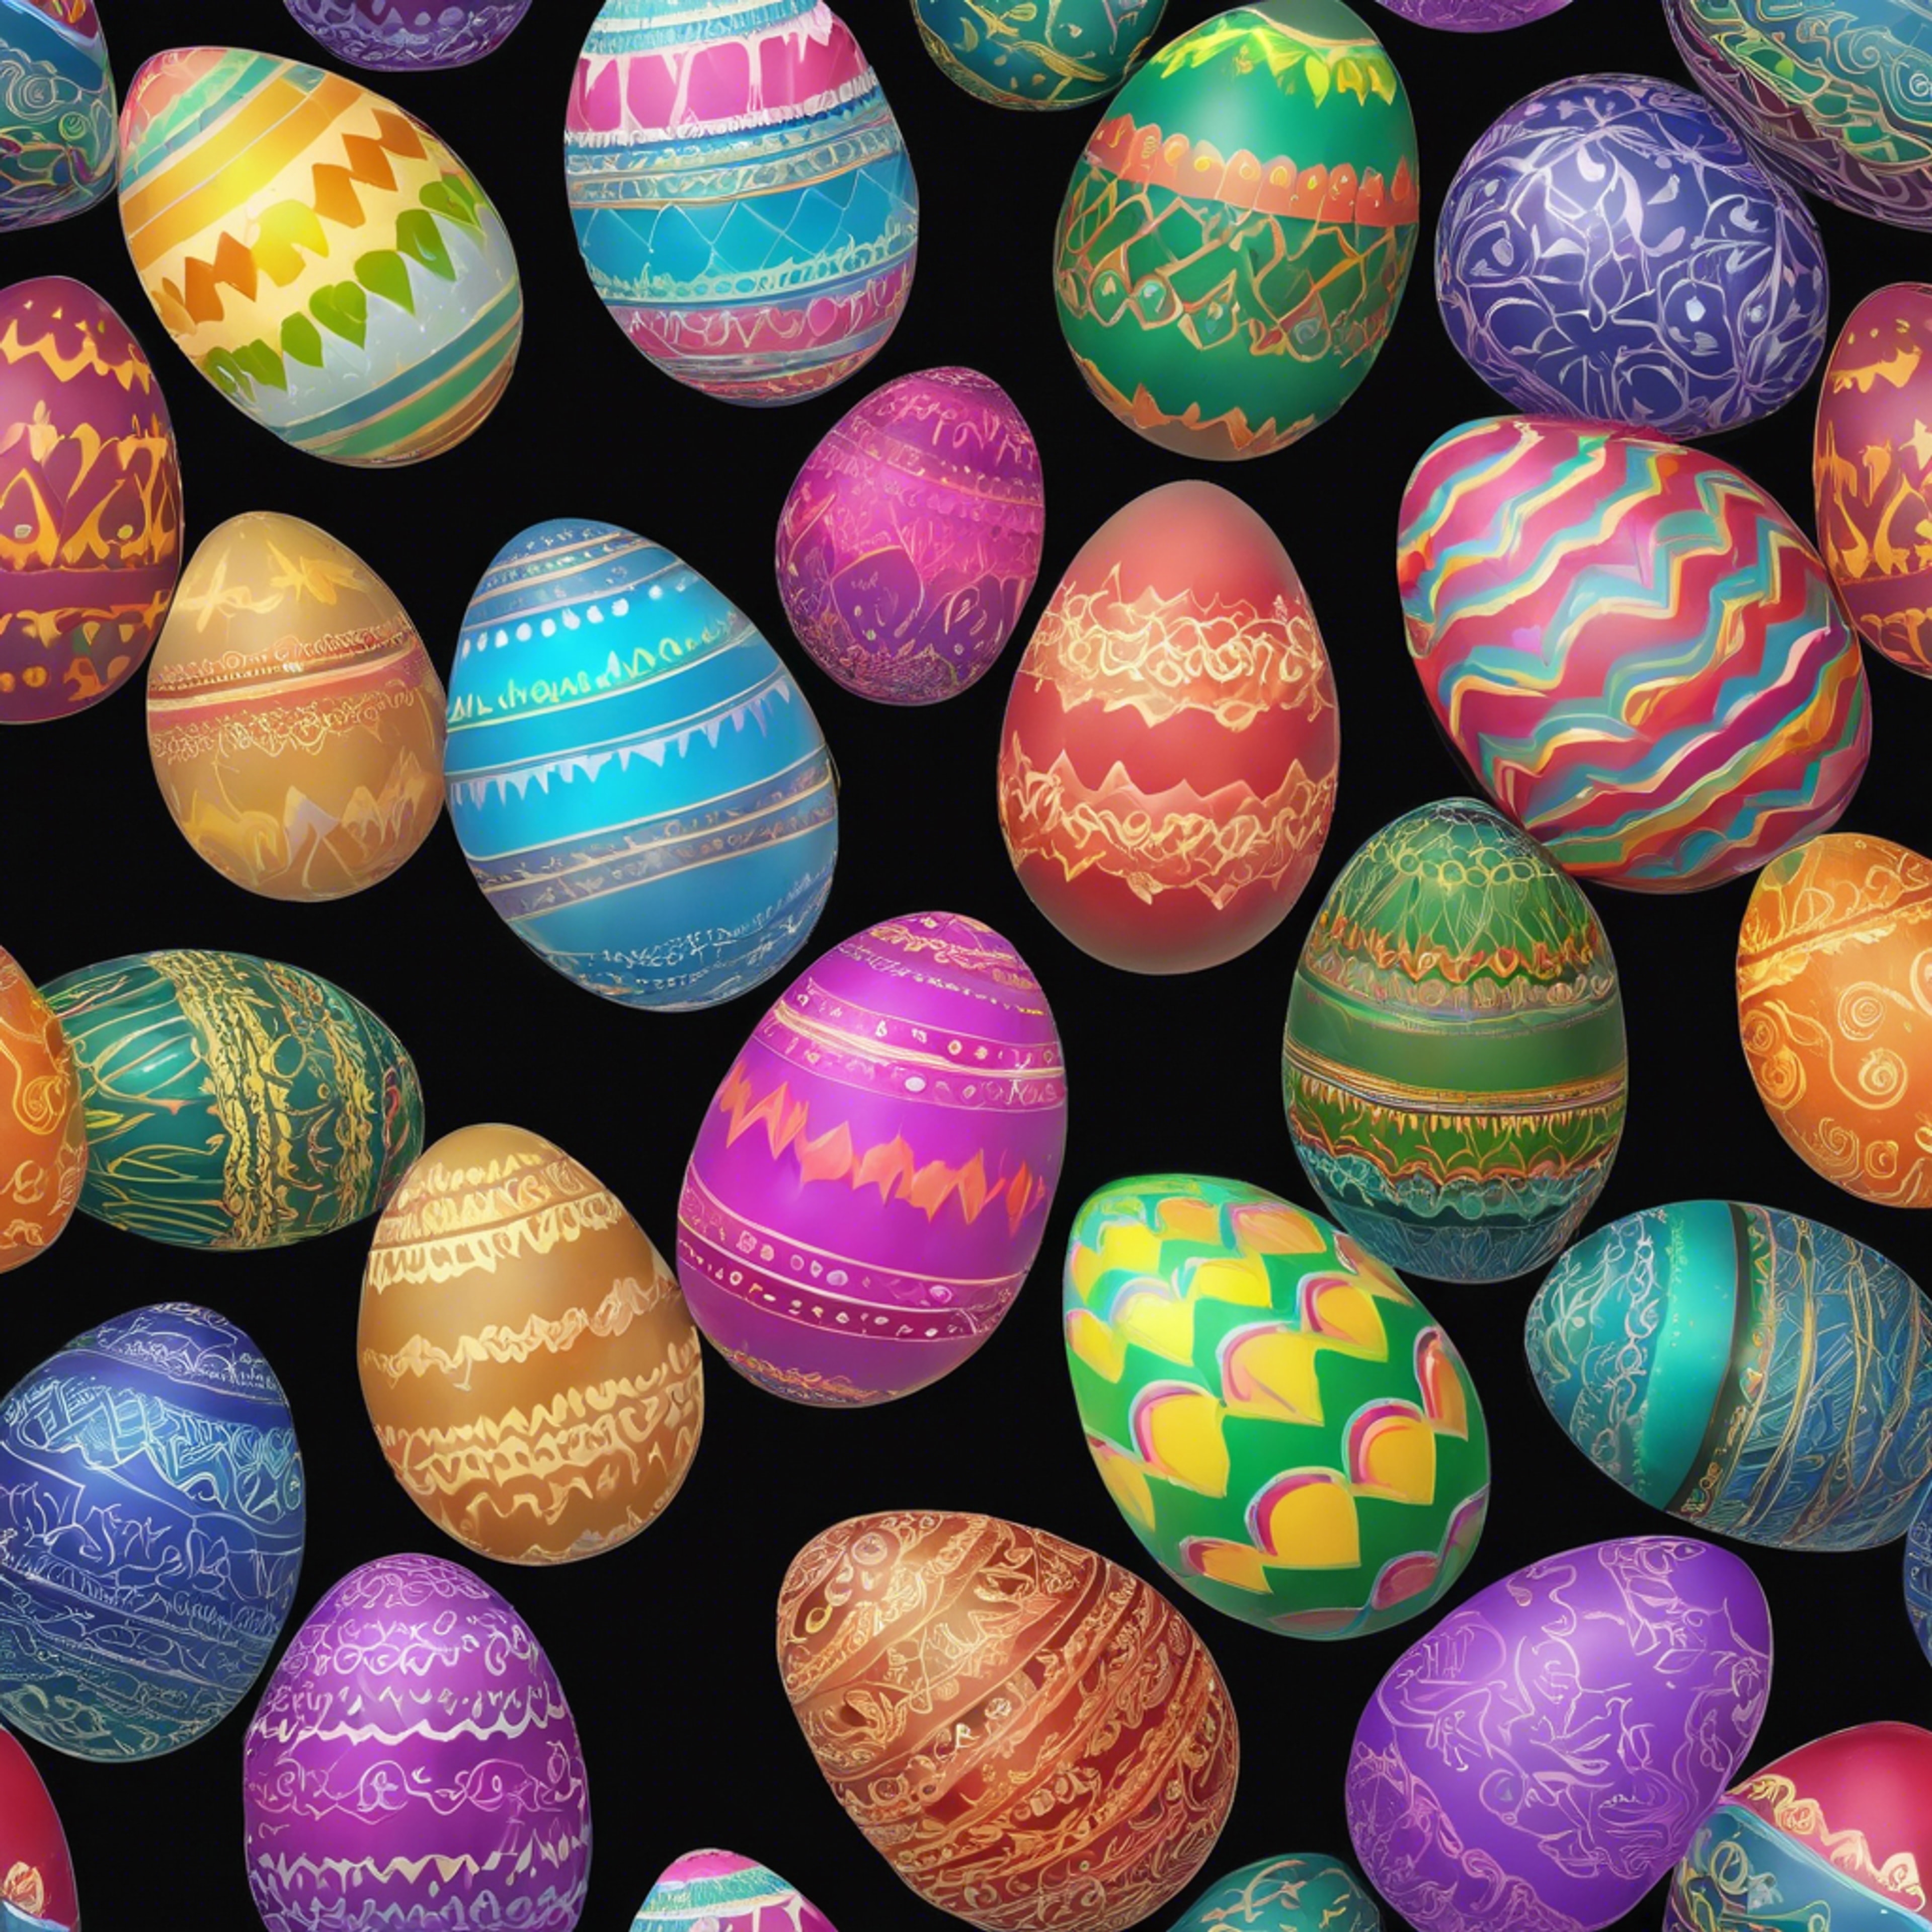 A rainbow-colored Easter egg displayed against a black background for dramatic effect. Wallpaper[001a212516d6409aac67]